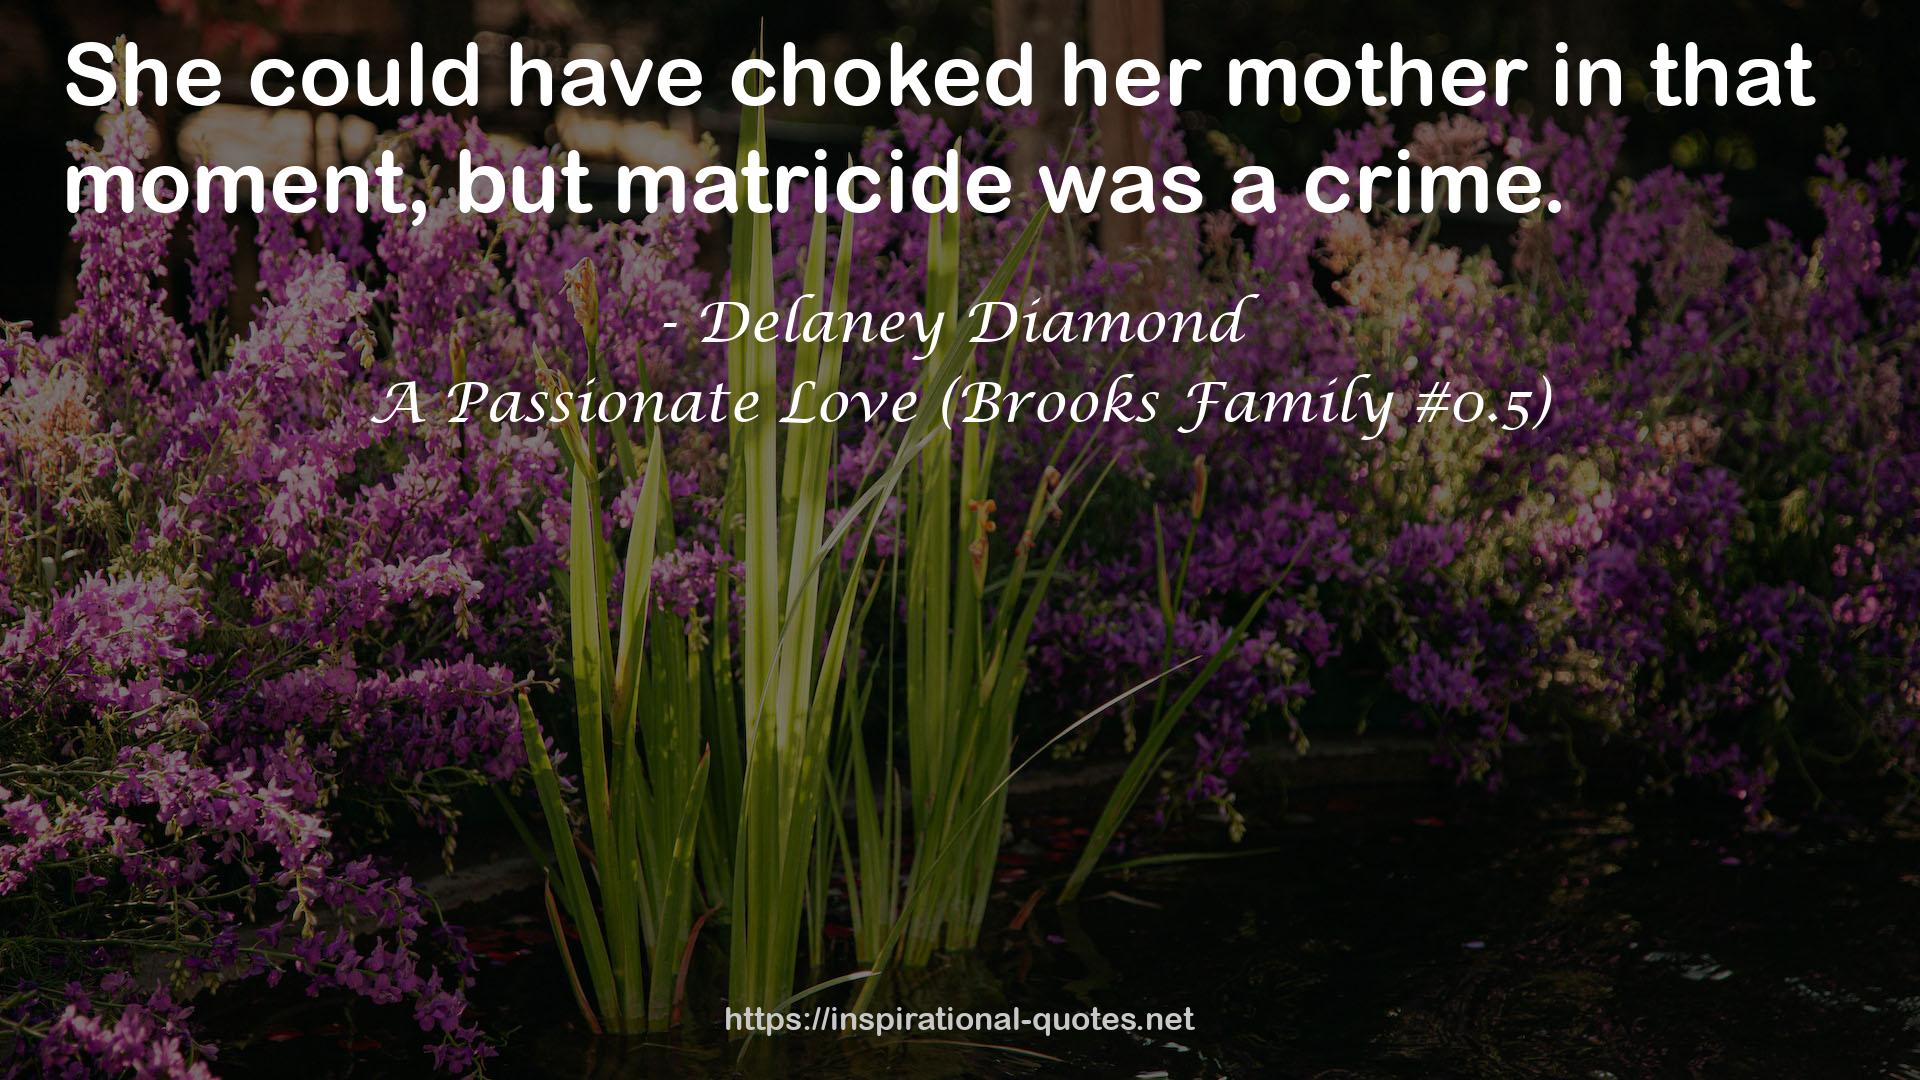 A Passionate Love (Brooks Family #0.5) QUOTES